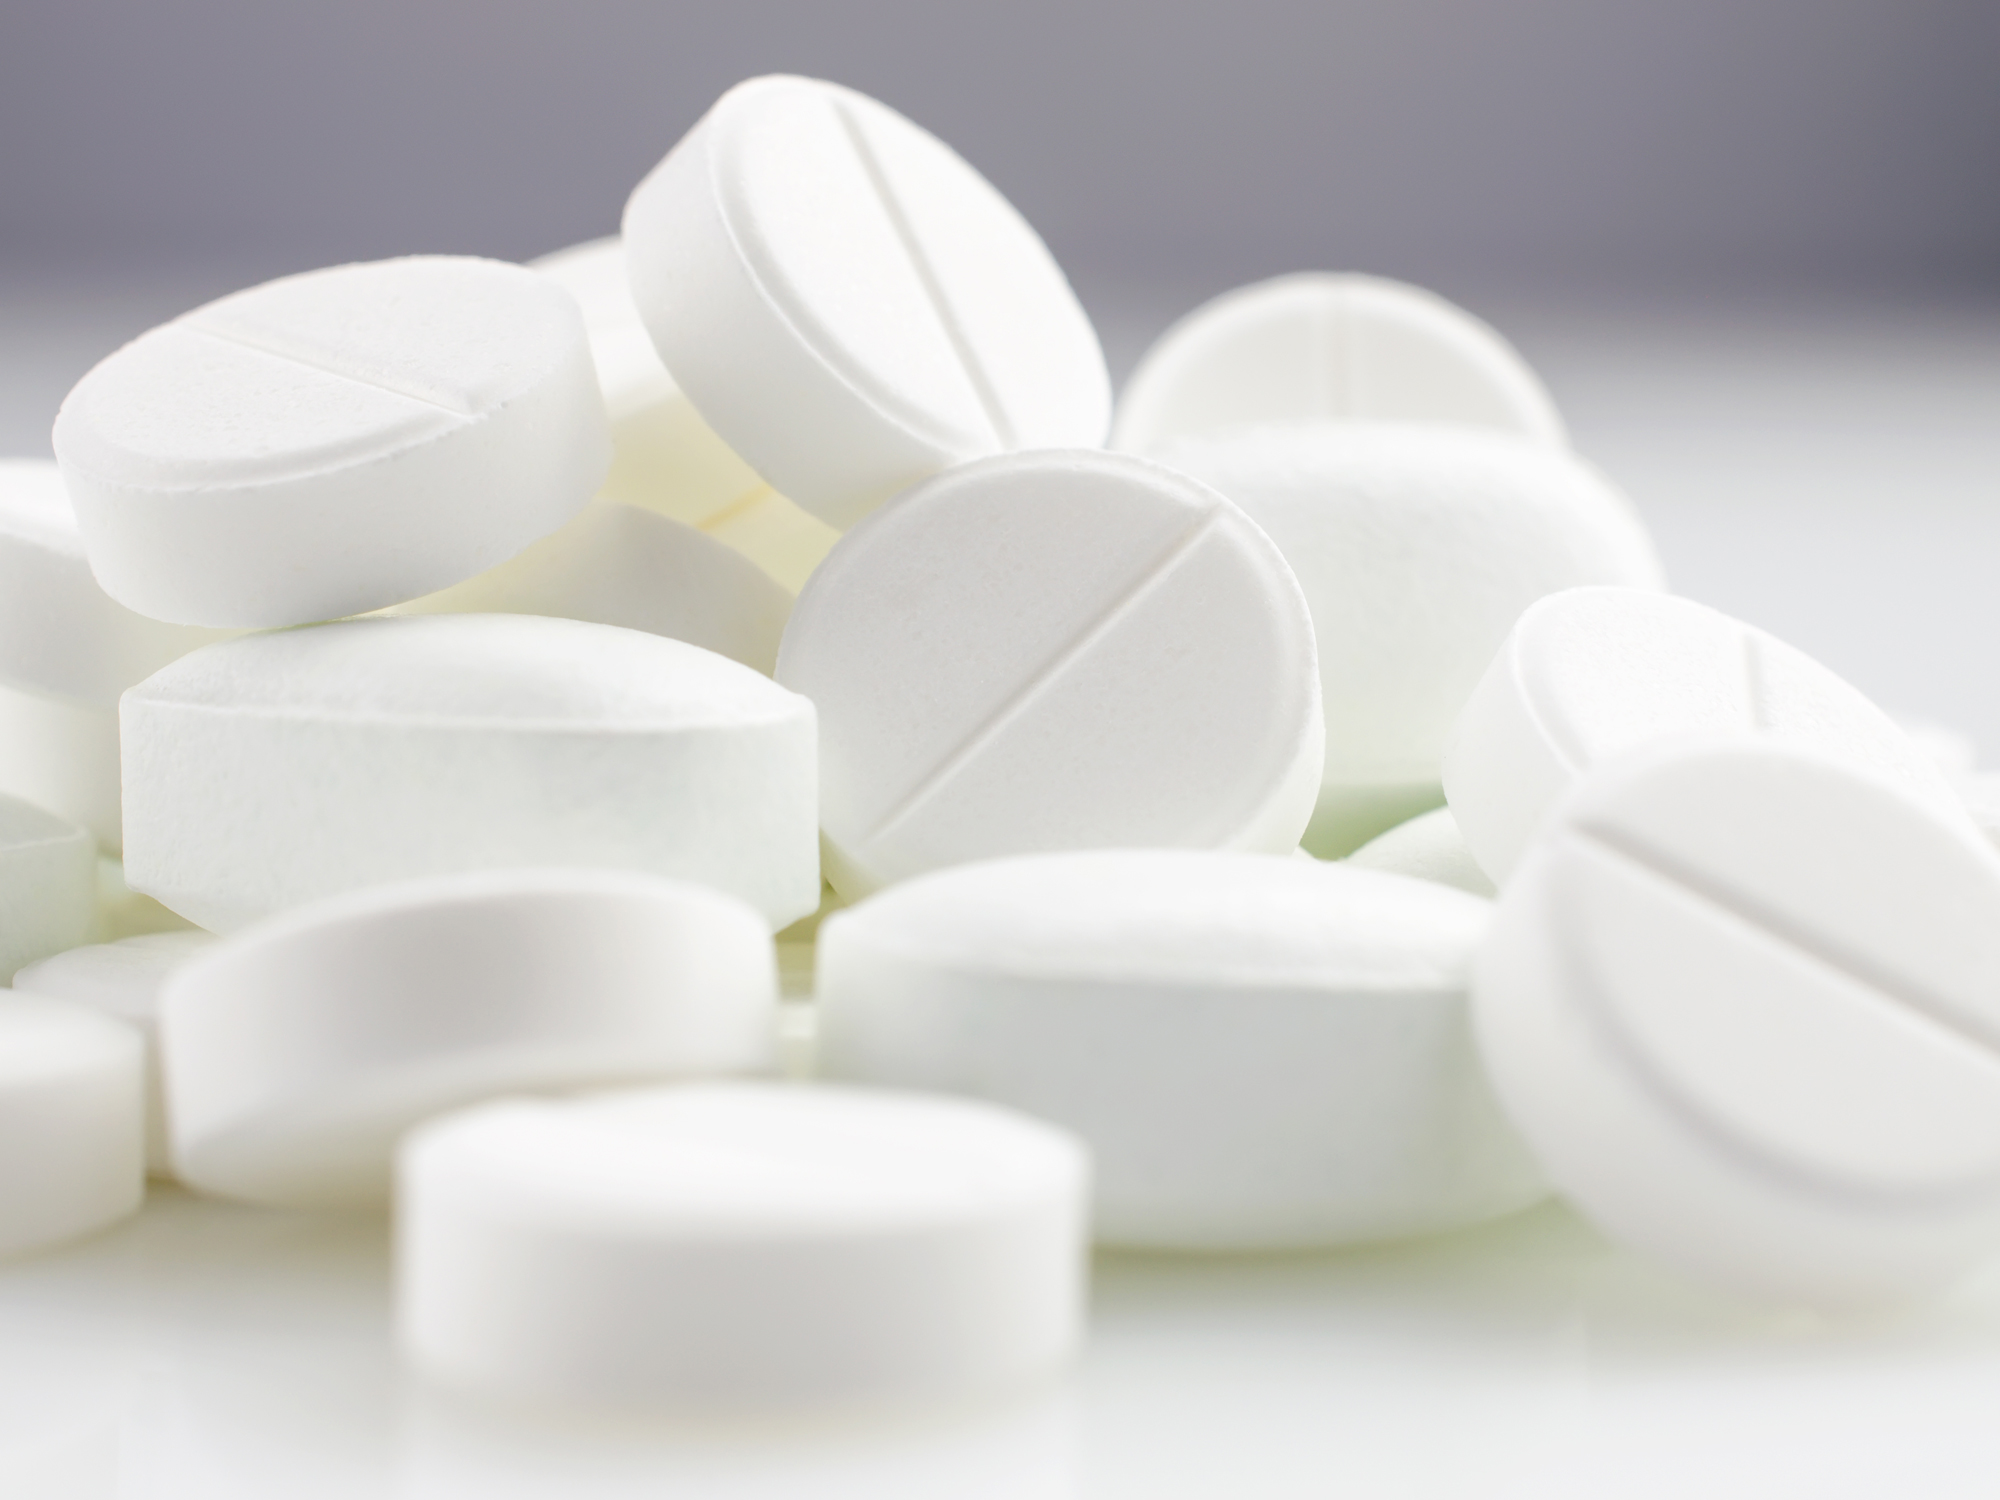 The cancer-protective power of aspirin